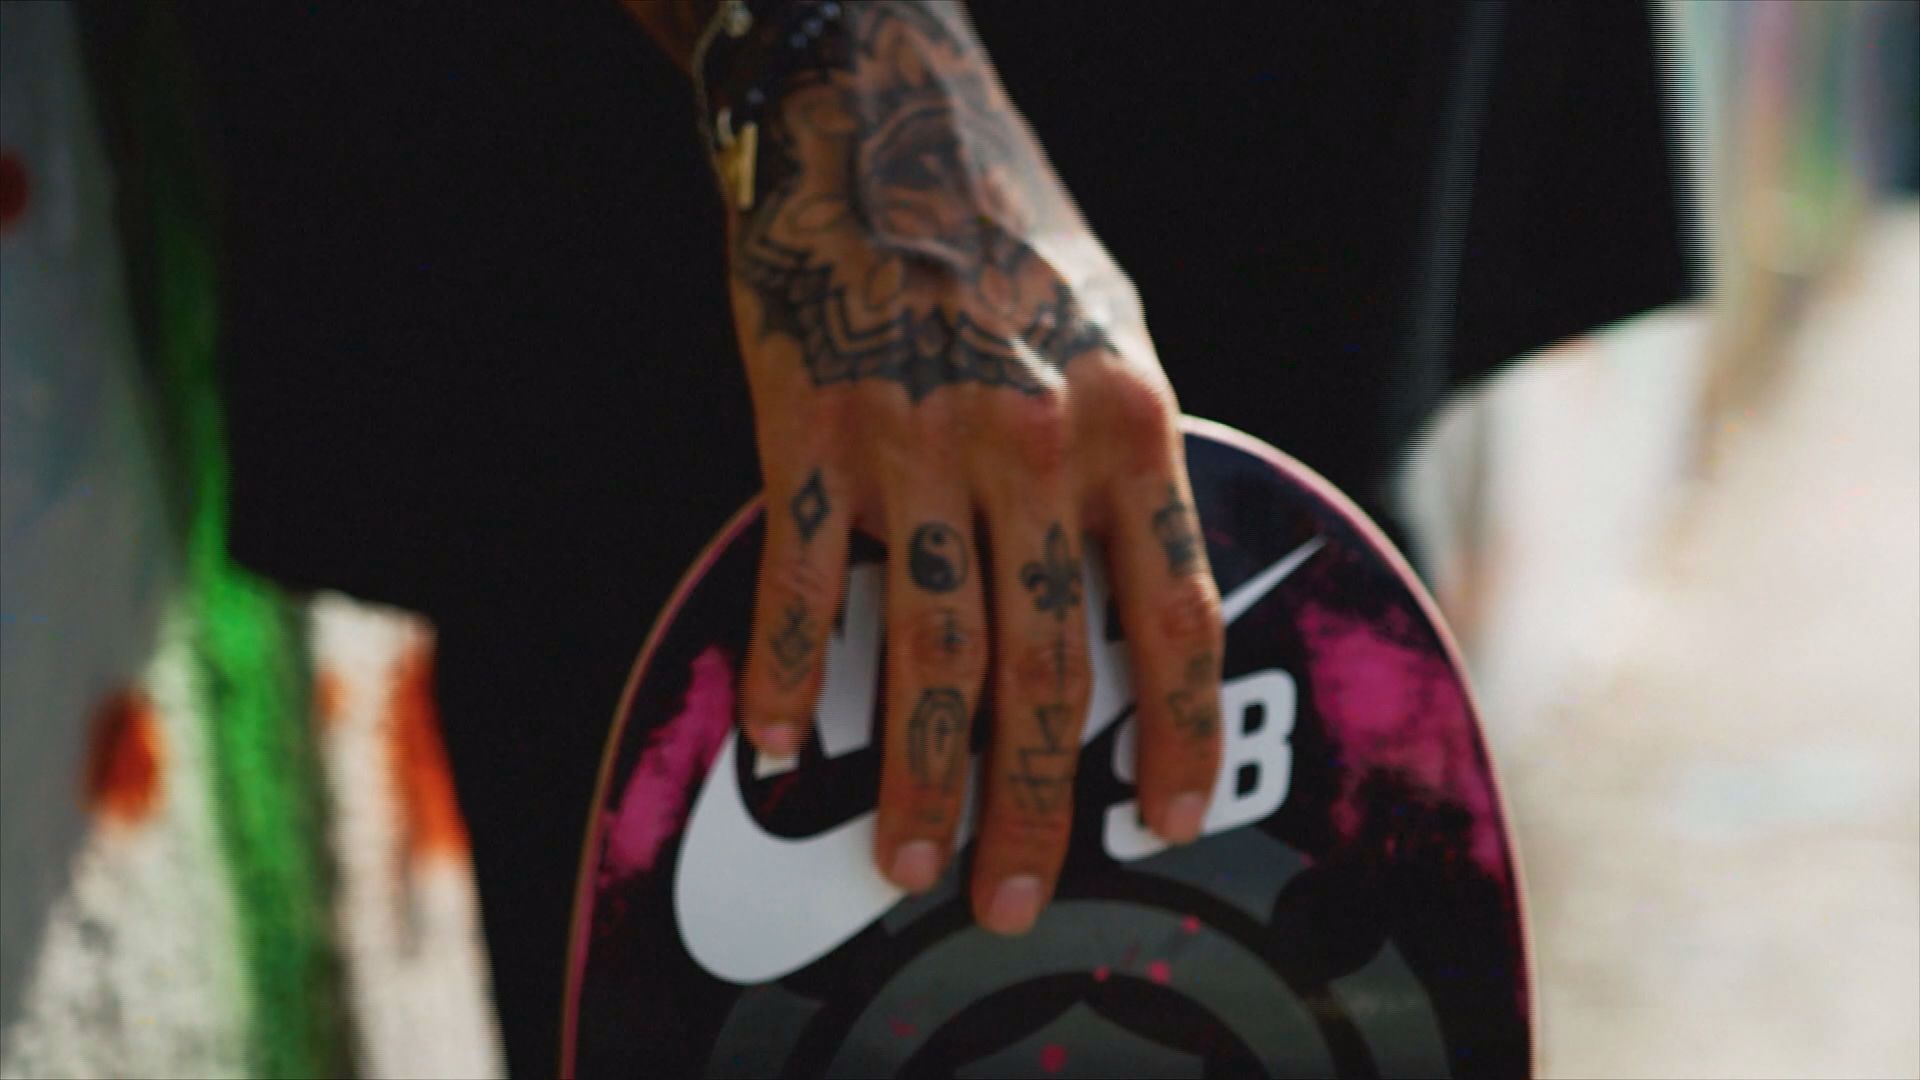 Olympic athletes show off their tattoo designs and what inspired their ink.